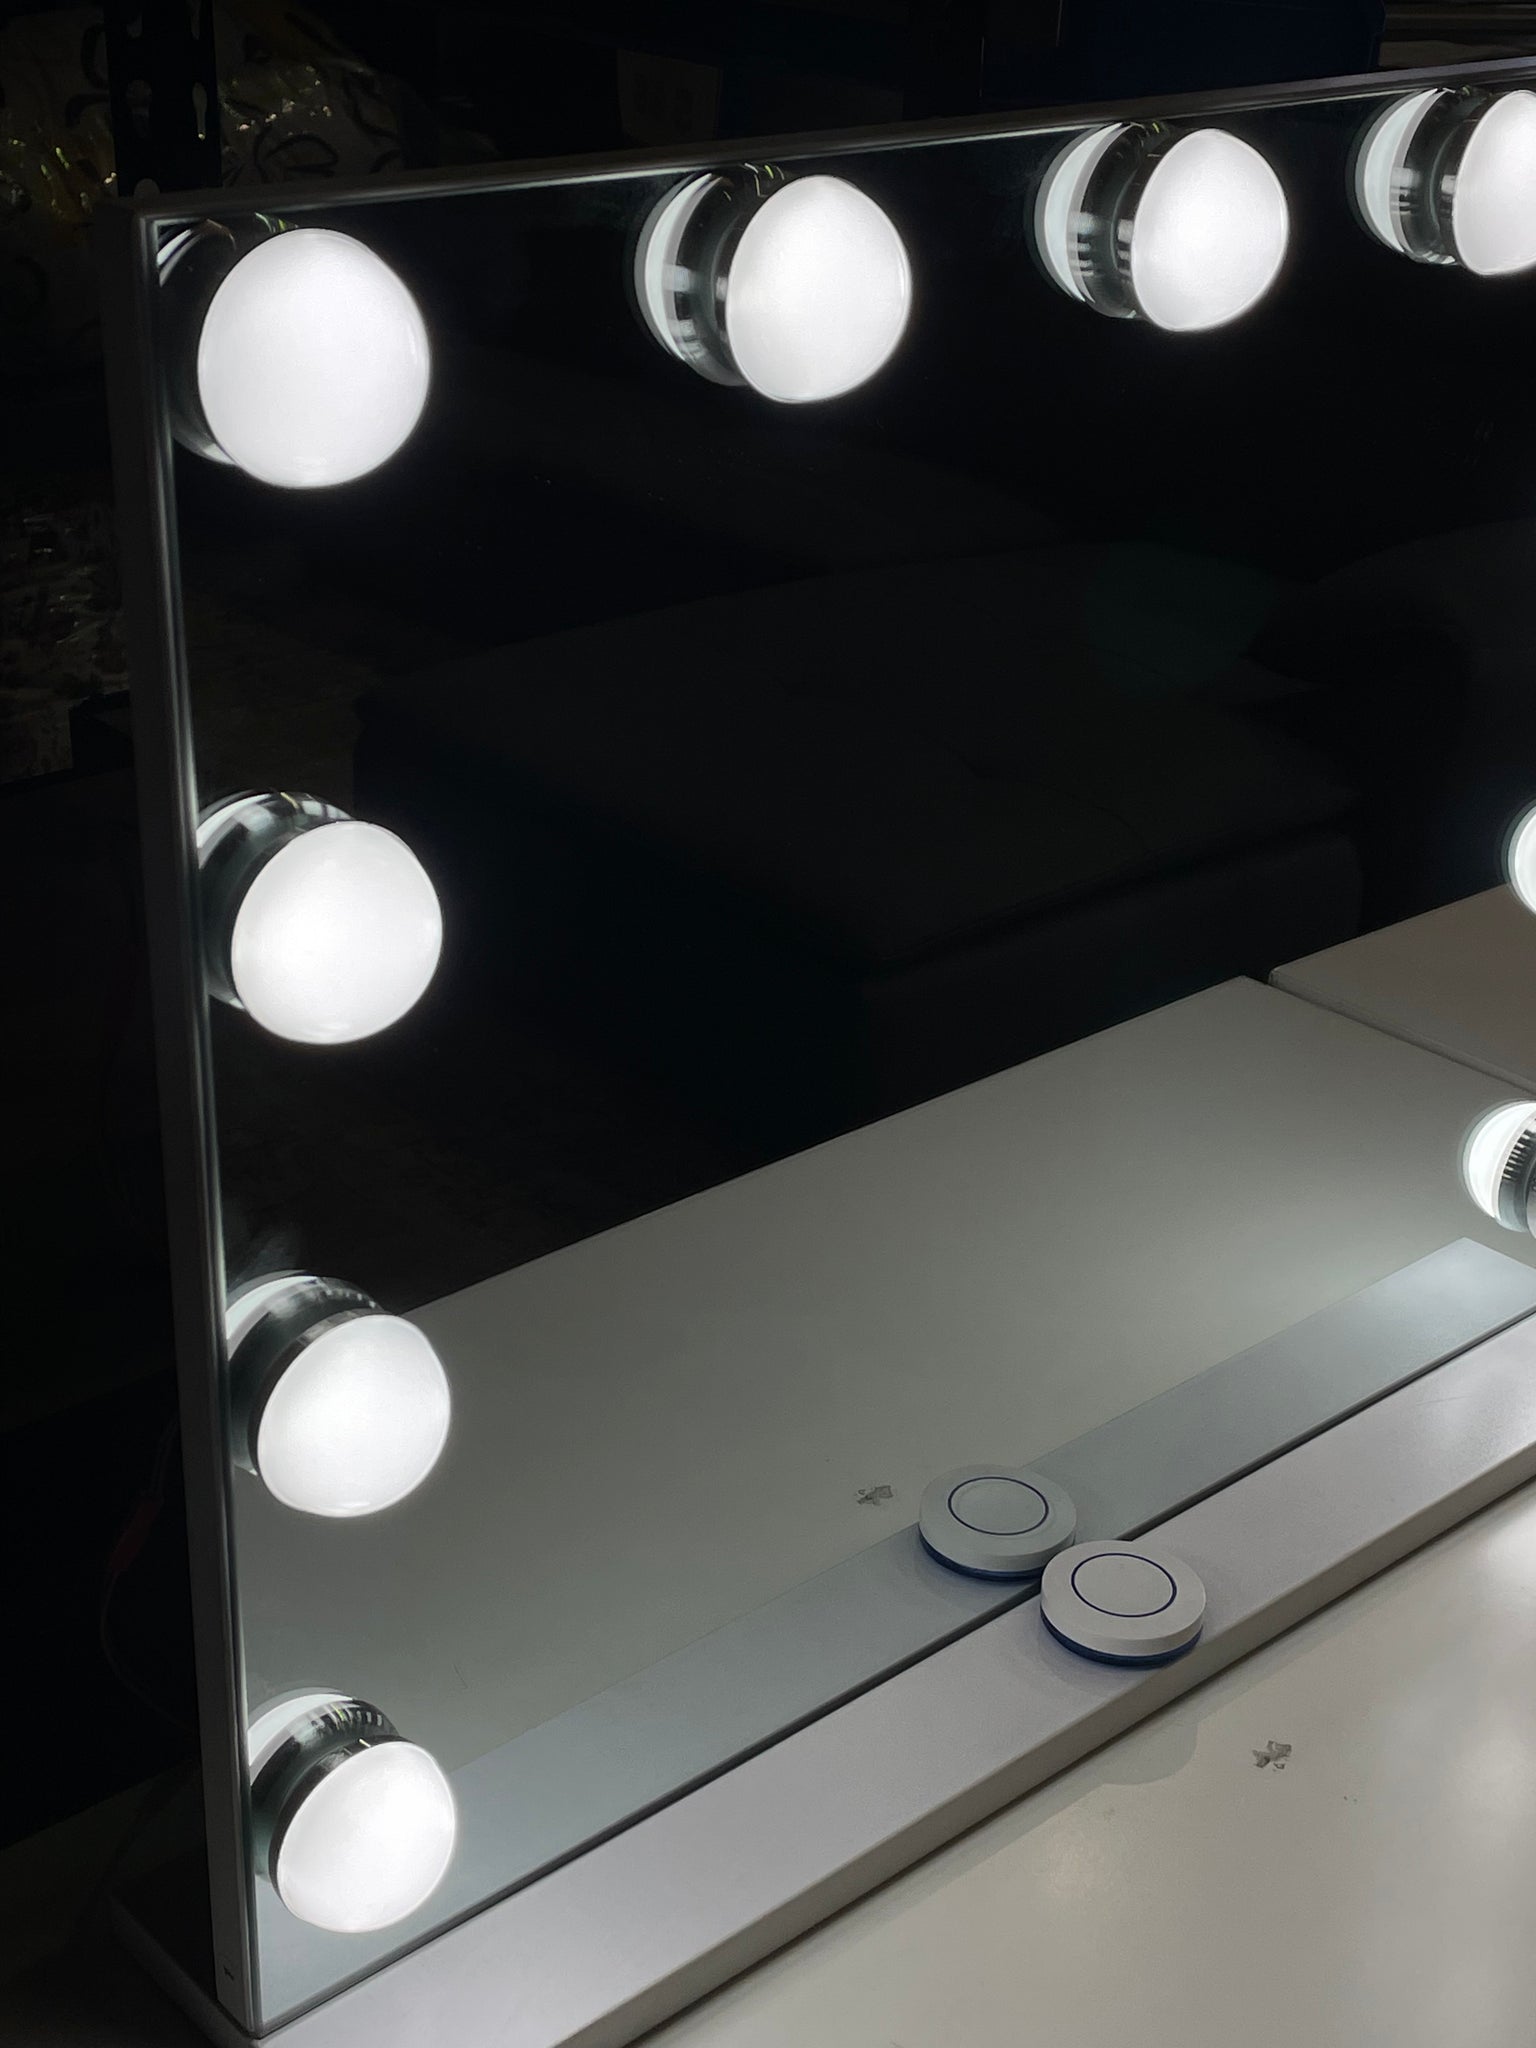 Vanity LED Mirror (580mm*440mm) + Dress-up table with Drawer (800mm(L) x 800mm(H) x 420mm(D)) & pull out chair